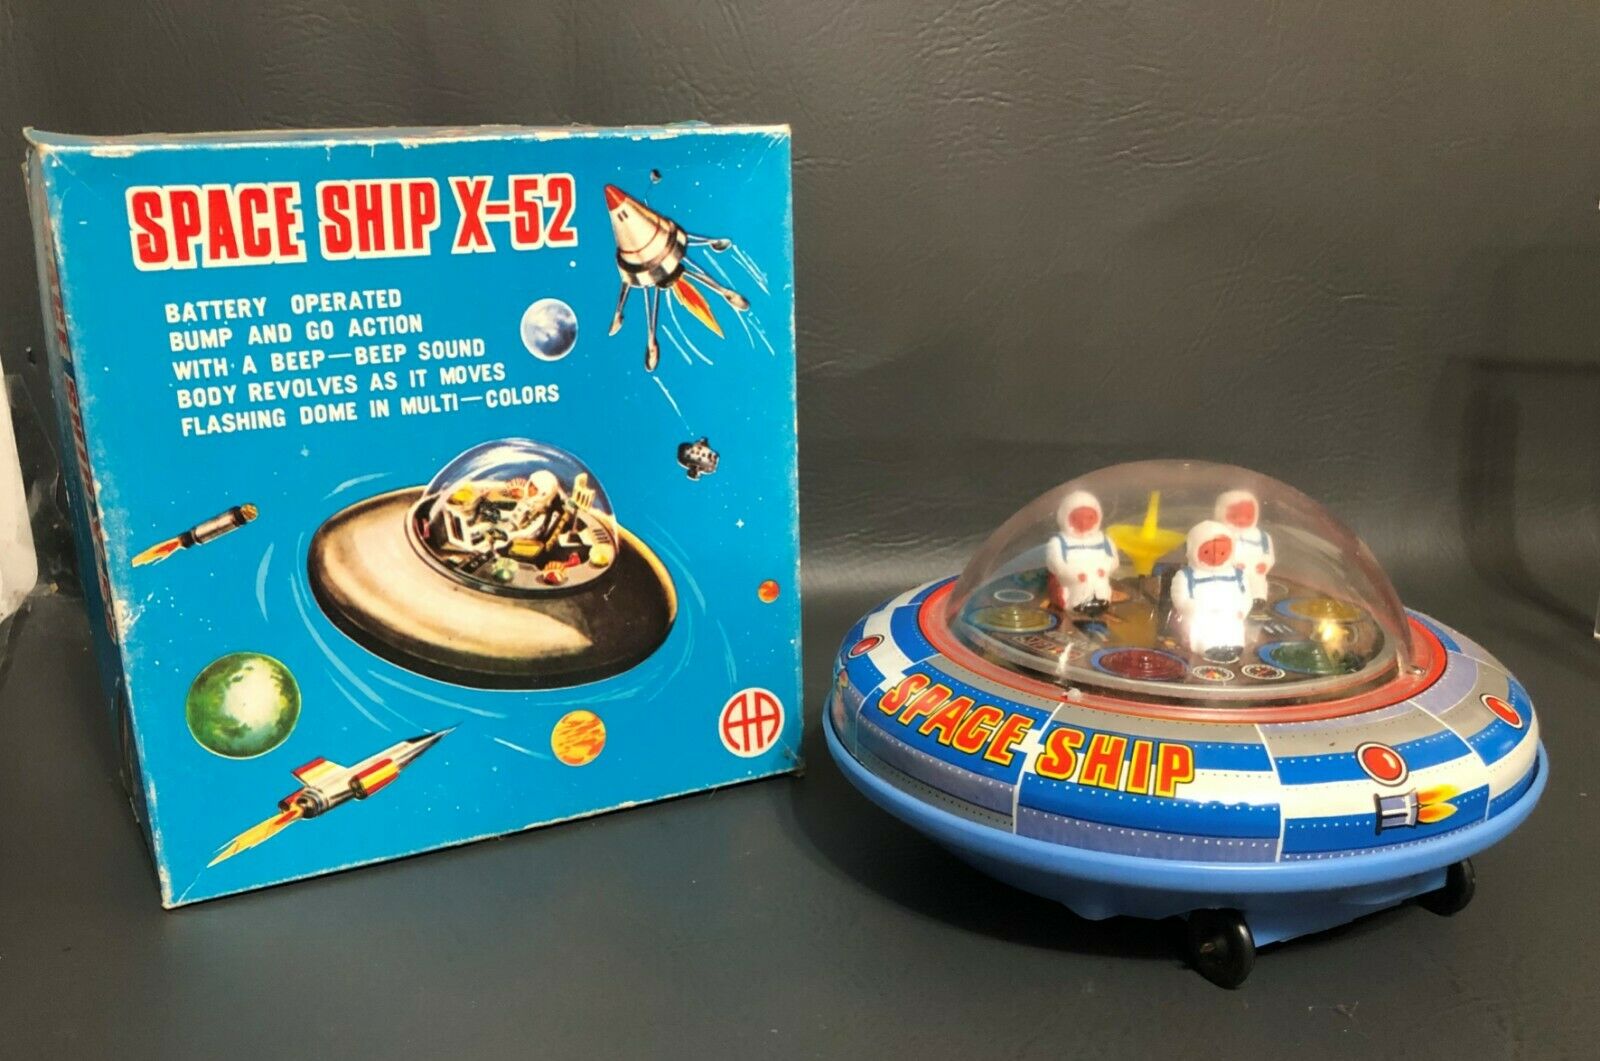 Vintage Ananiadis Space Ship X-52 Battery Operated Toy W Original Box Greece